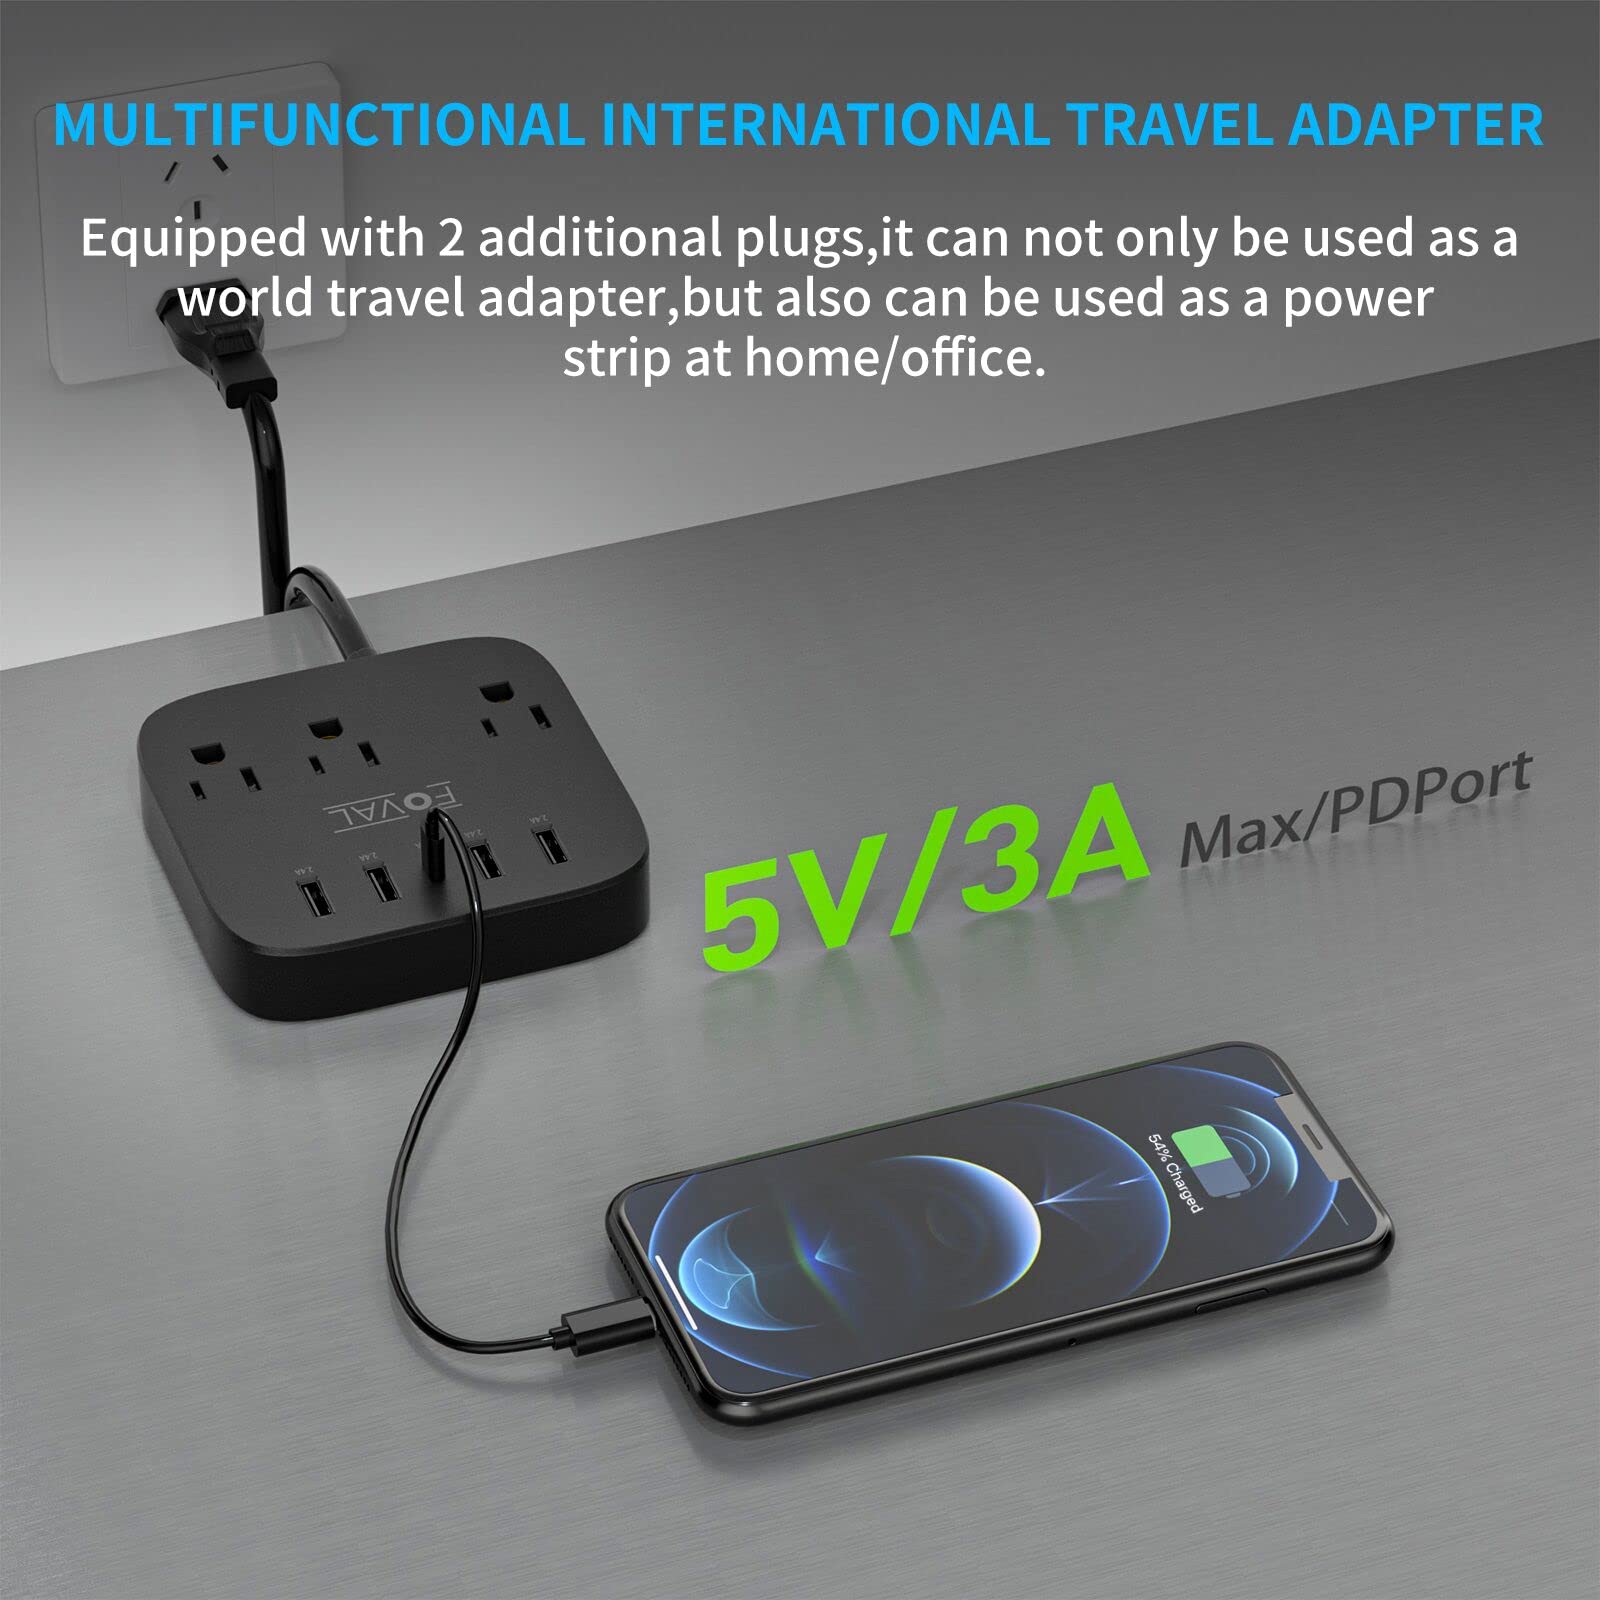 European Travel Plug Adapter, FOVAL EU UK US Power Strip with USB C and 4 USB Ports, 3 AC Outlets, Wall Mountable, 5ft Extension Cord, Compact for Travel, Cruise Ship, Home Office (Black)